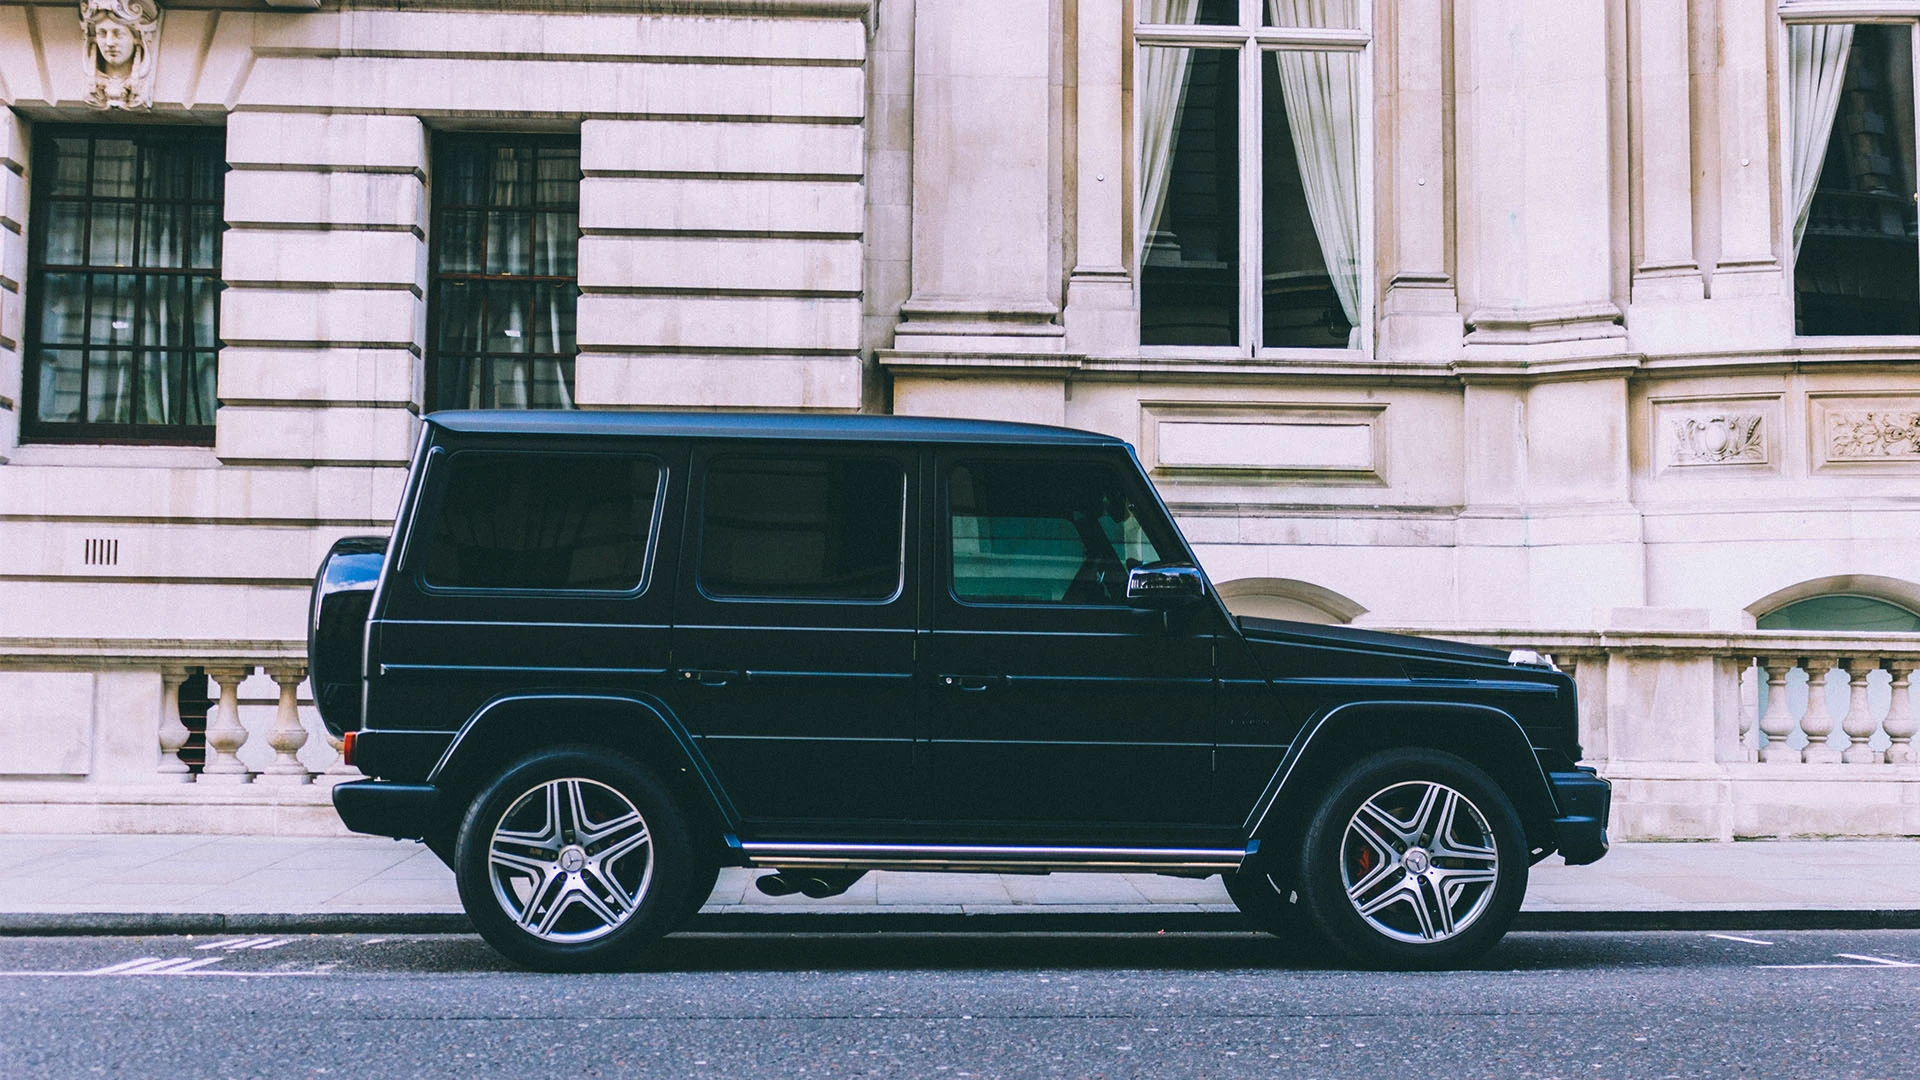 Black Mercedes G-Wagon parked on the side of the road, in front of a building